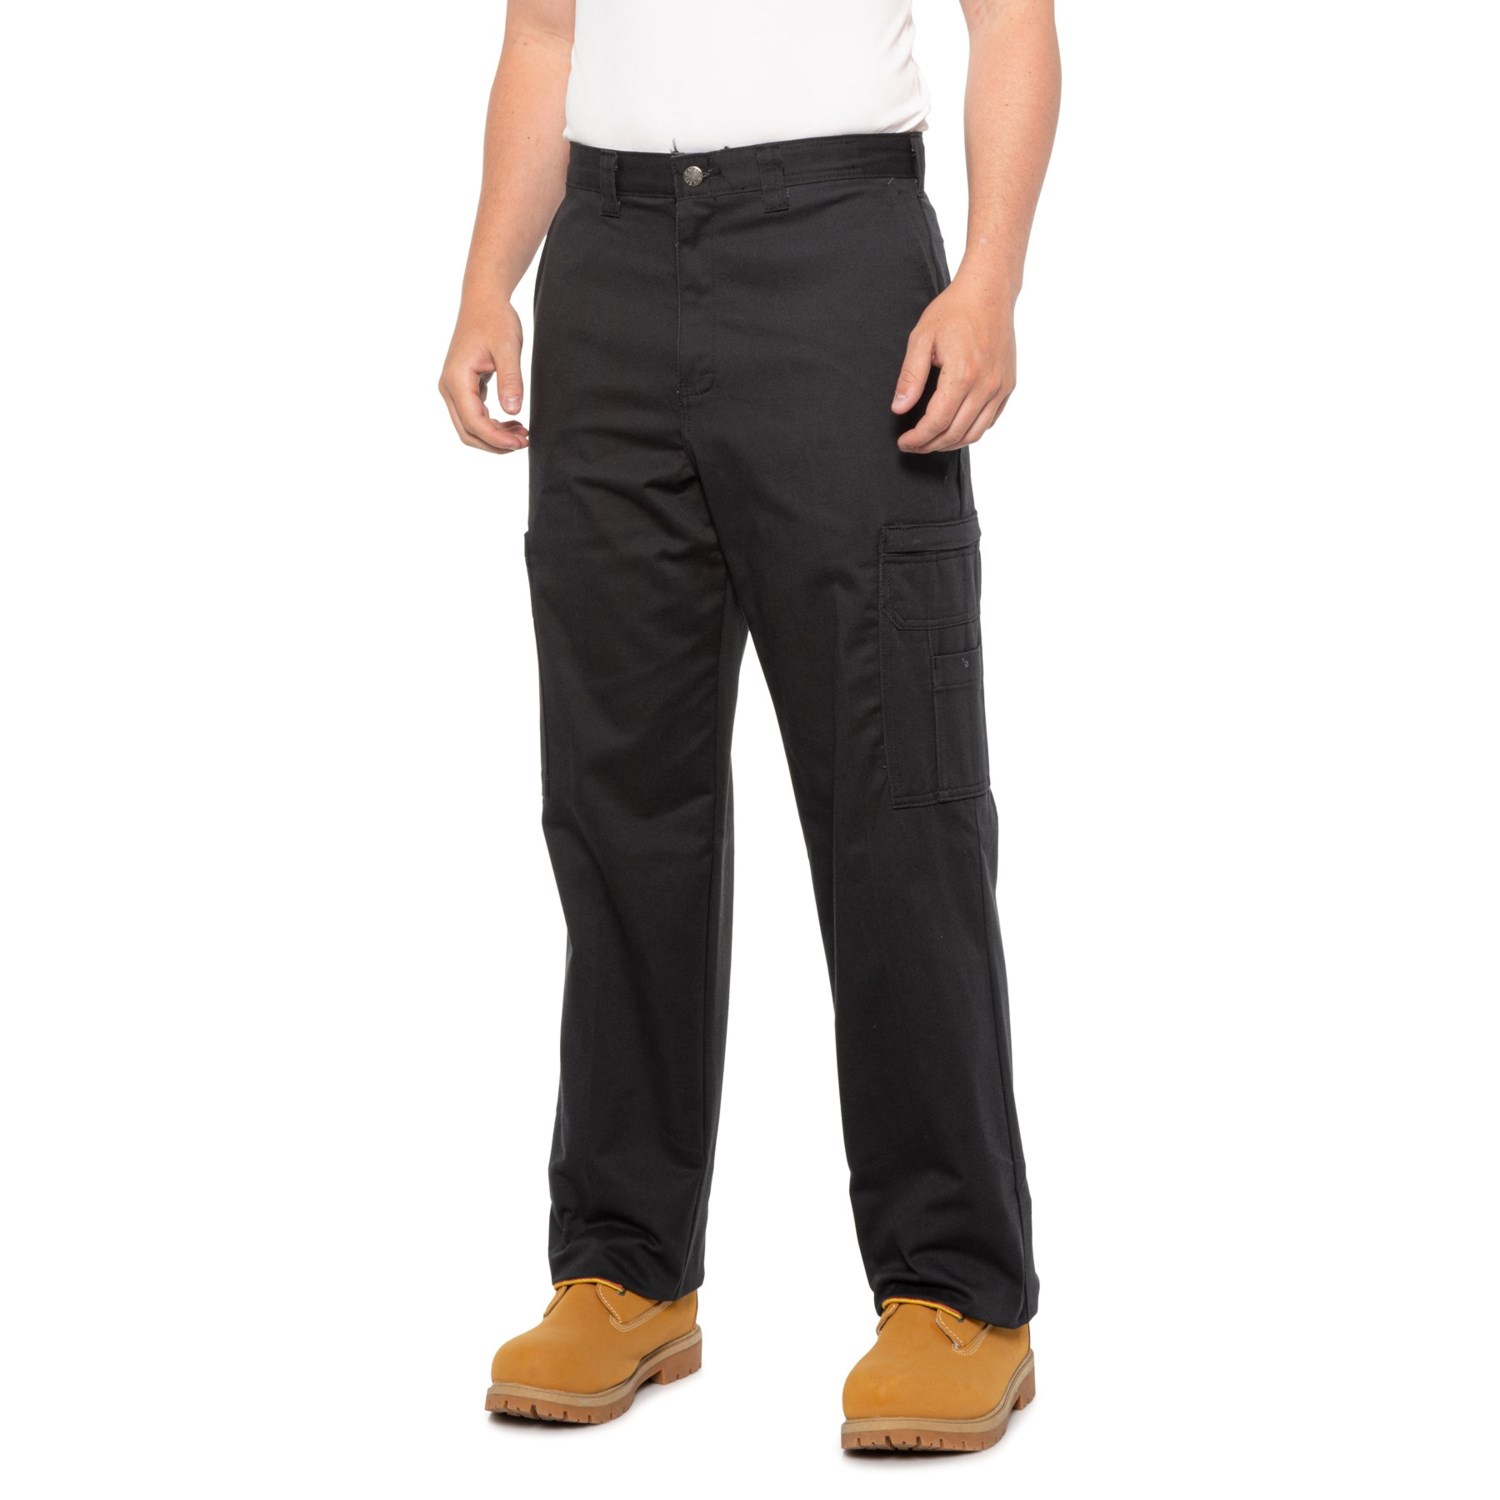 Dickies Relaxed Fit Cargo Work Pants - FitnessRetro